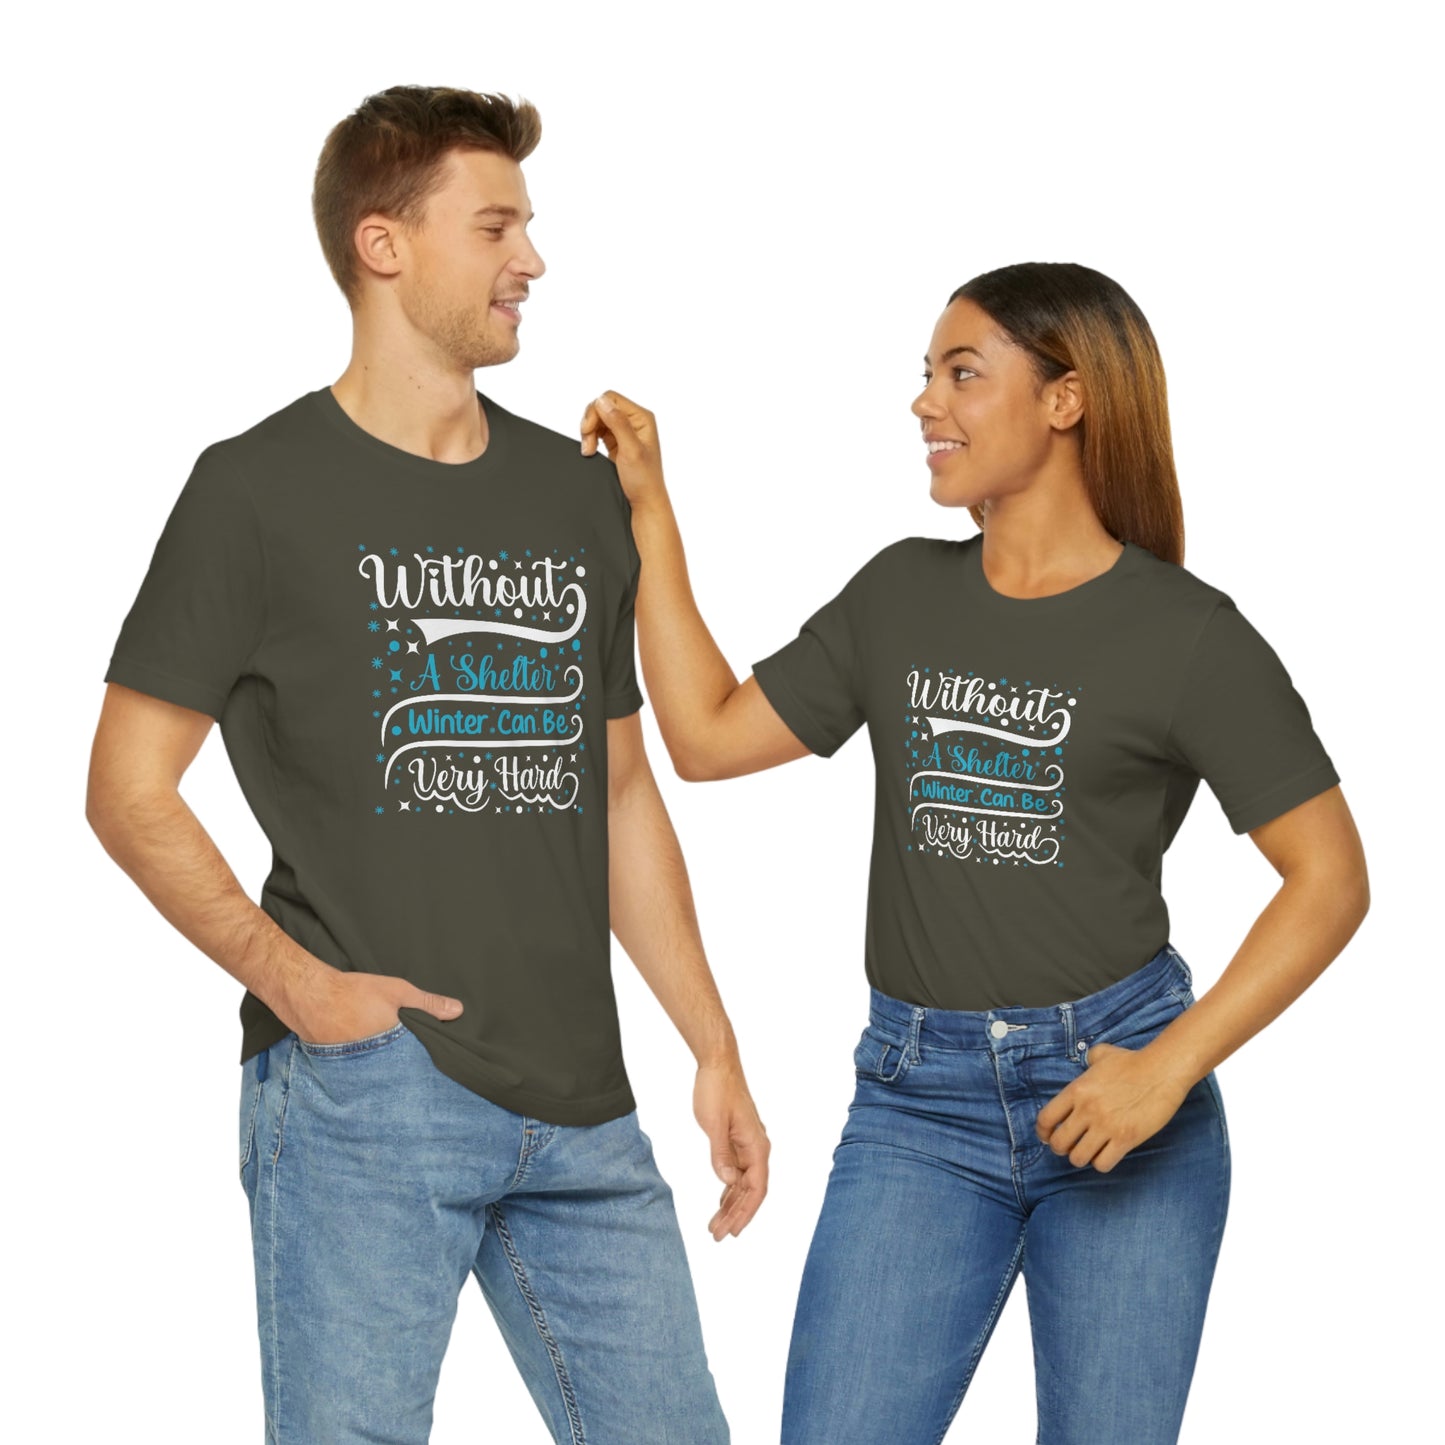 Without a Shelter Winter Can Be Very Hard Print Unisex Jersey Short Sleeve Tee